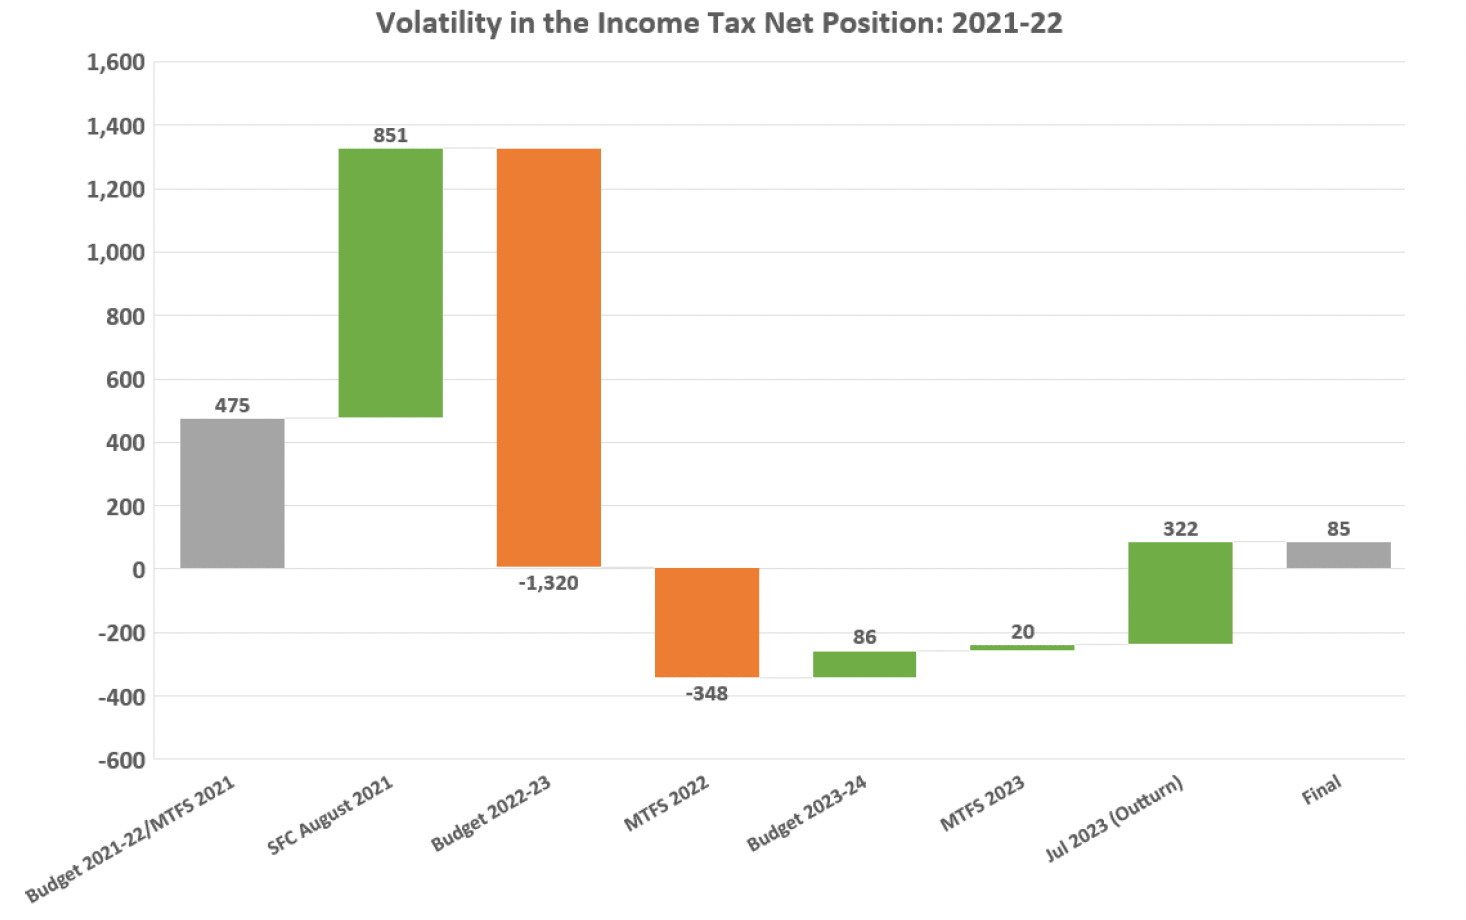 A graph showing volatility in the income tax net position. The left/vertical side of the graph shows numerical values from -600 to 1,600. The bottom/horizontal side of the graph displays different fiscal events; Budget 2021-22/MTFS 2021, SFC August 2021, Budget 2022-23, MTFS 2022, Budget 2023-24 MTFS 2023, July 2023 (Outturn), Final. The graph has a bar for each event displaying the volatility of the net position at each event.